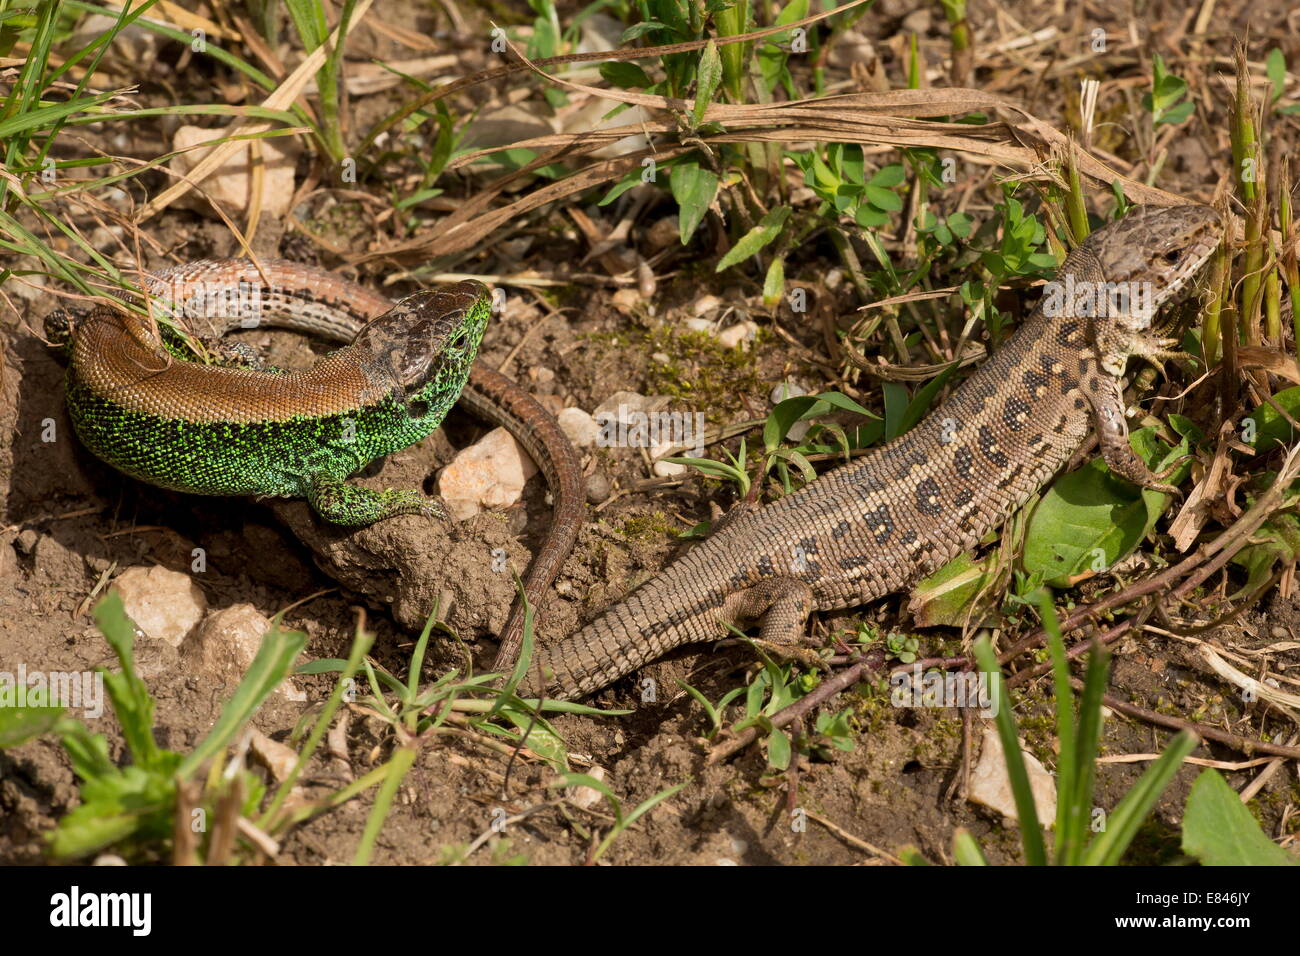 Sand lizards, Lacerta agilis, male and female courting, in breeding season. Stock Photo